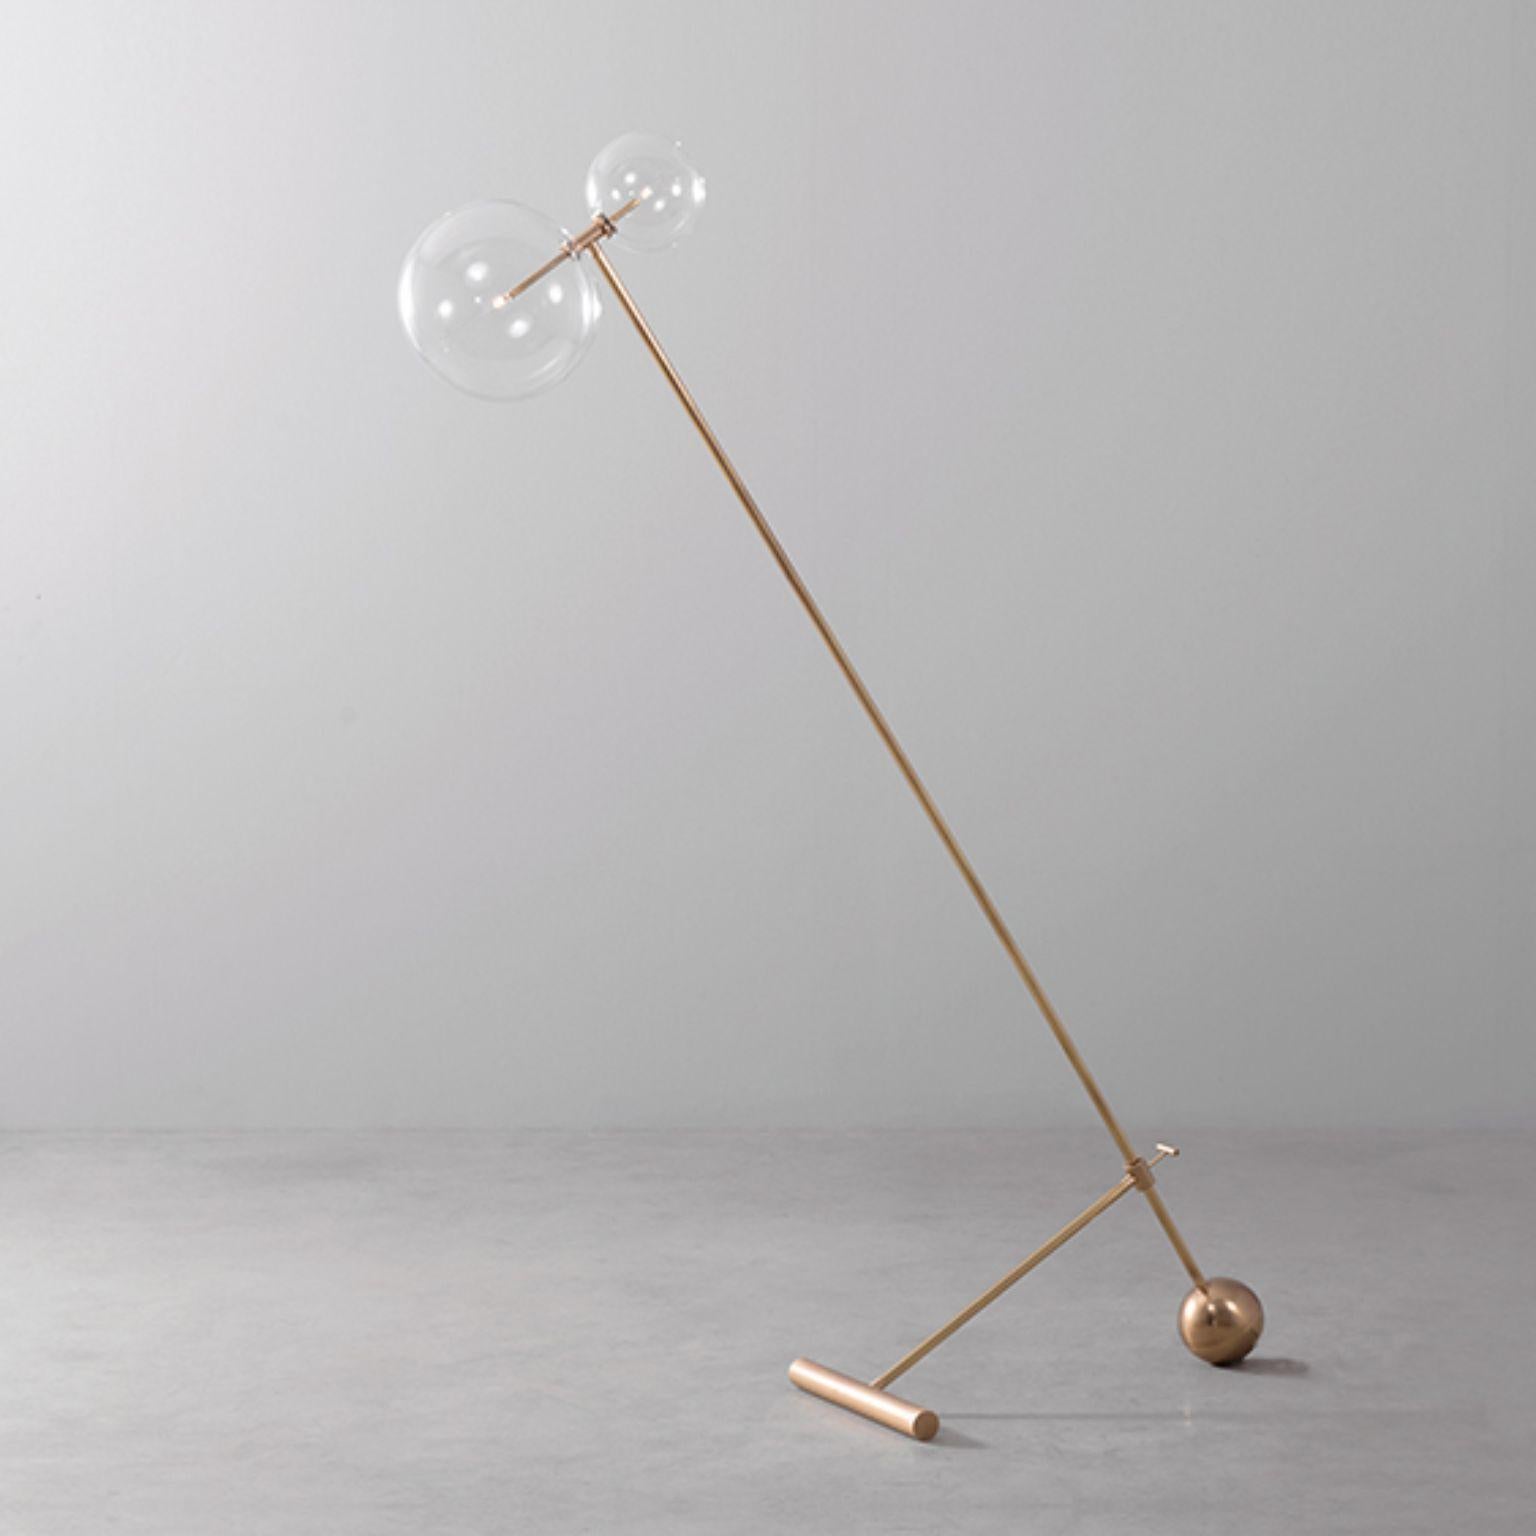 Contemporary brass floor lamp by Schwung
Dimensions: W 35 x D 79 x H 188 cm
Materials: Natural brass, hand blown glass globes
Other finishes available.

Cord 2m with inline on-off switch and plug. Switch location 50cm from the base.
Glass